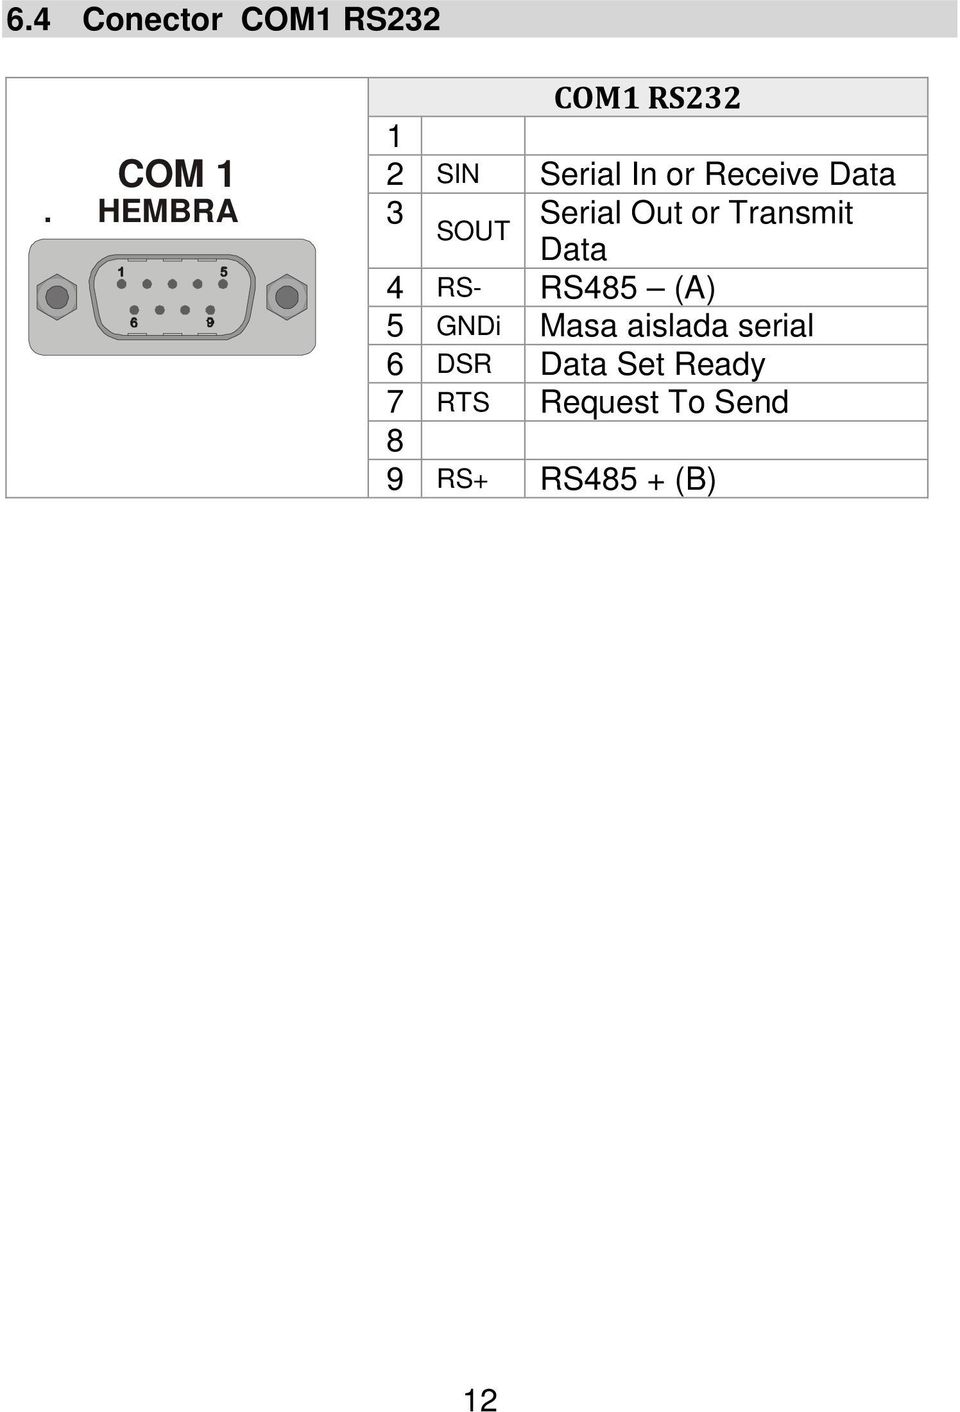 Serial Out or Transmit SOUT Data 4 RS- RS485 (A) 5 GNDi